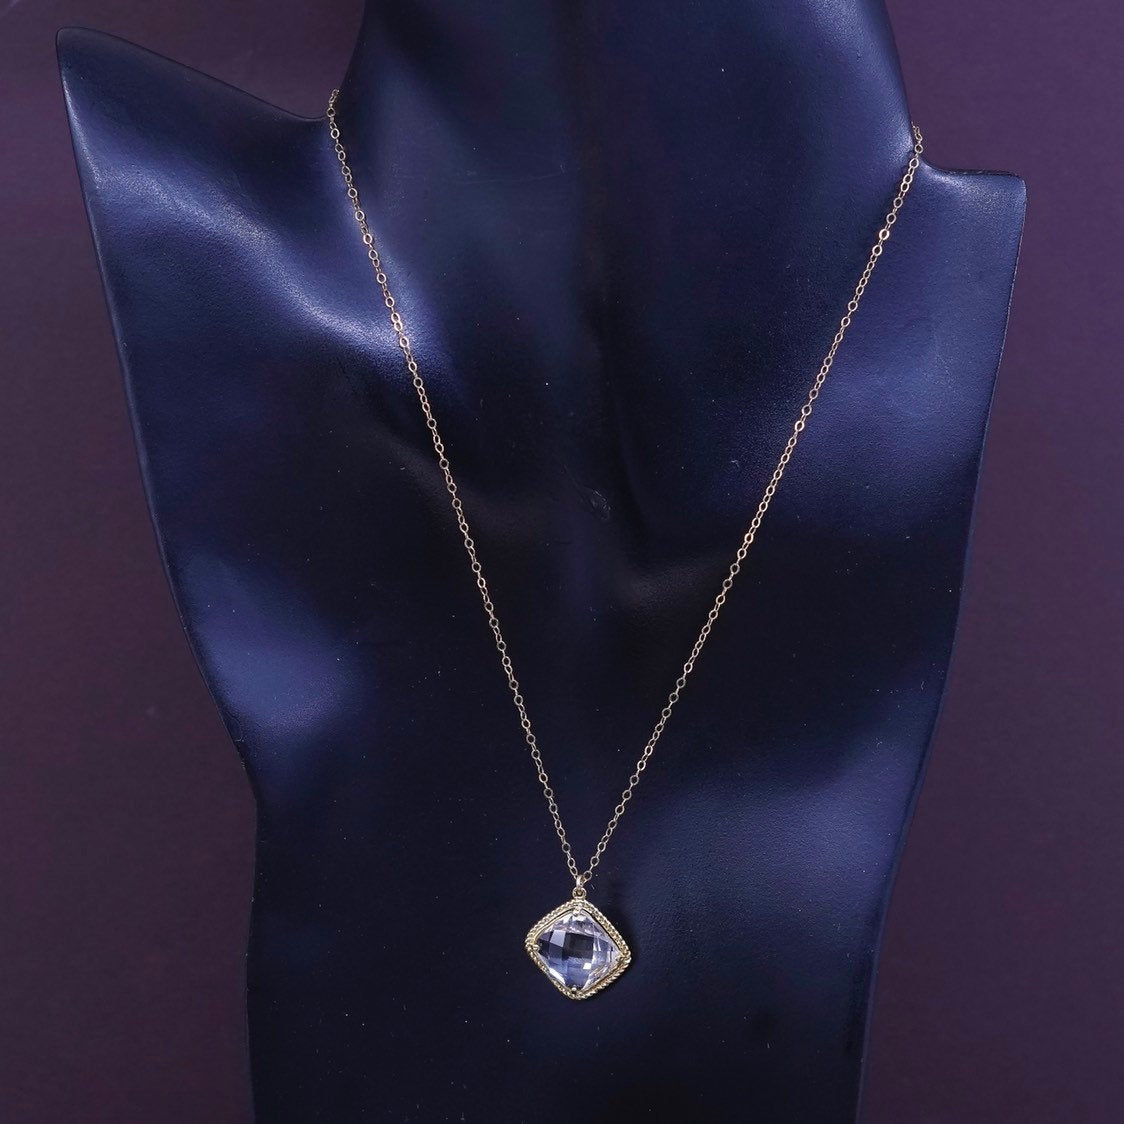 16", 1/20 14K gold filled handmade necklace, Circle chain w/ crystal pendant